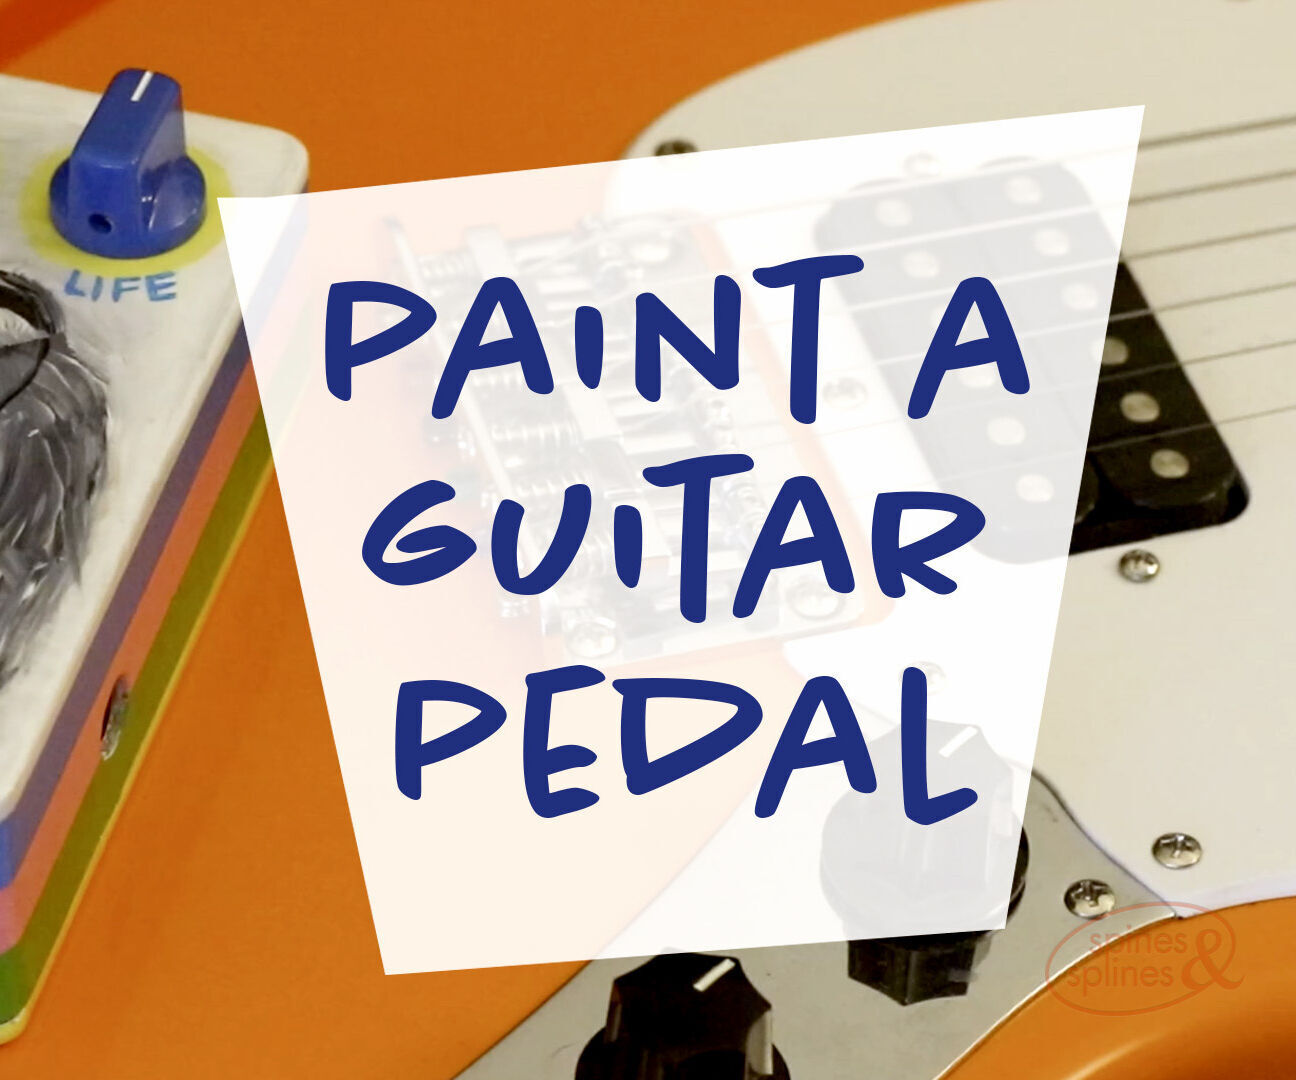 Hand Painting a Guitar Pedal